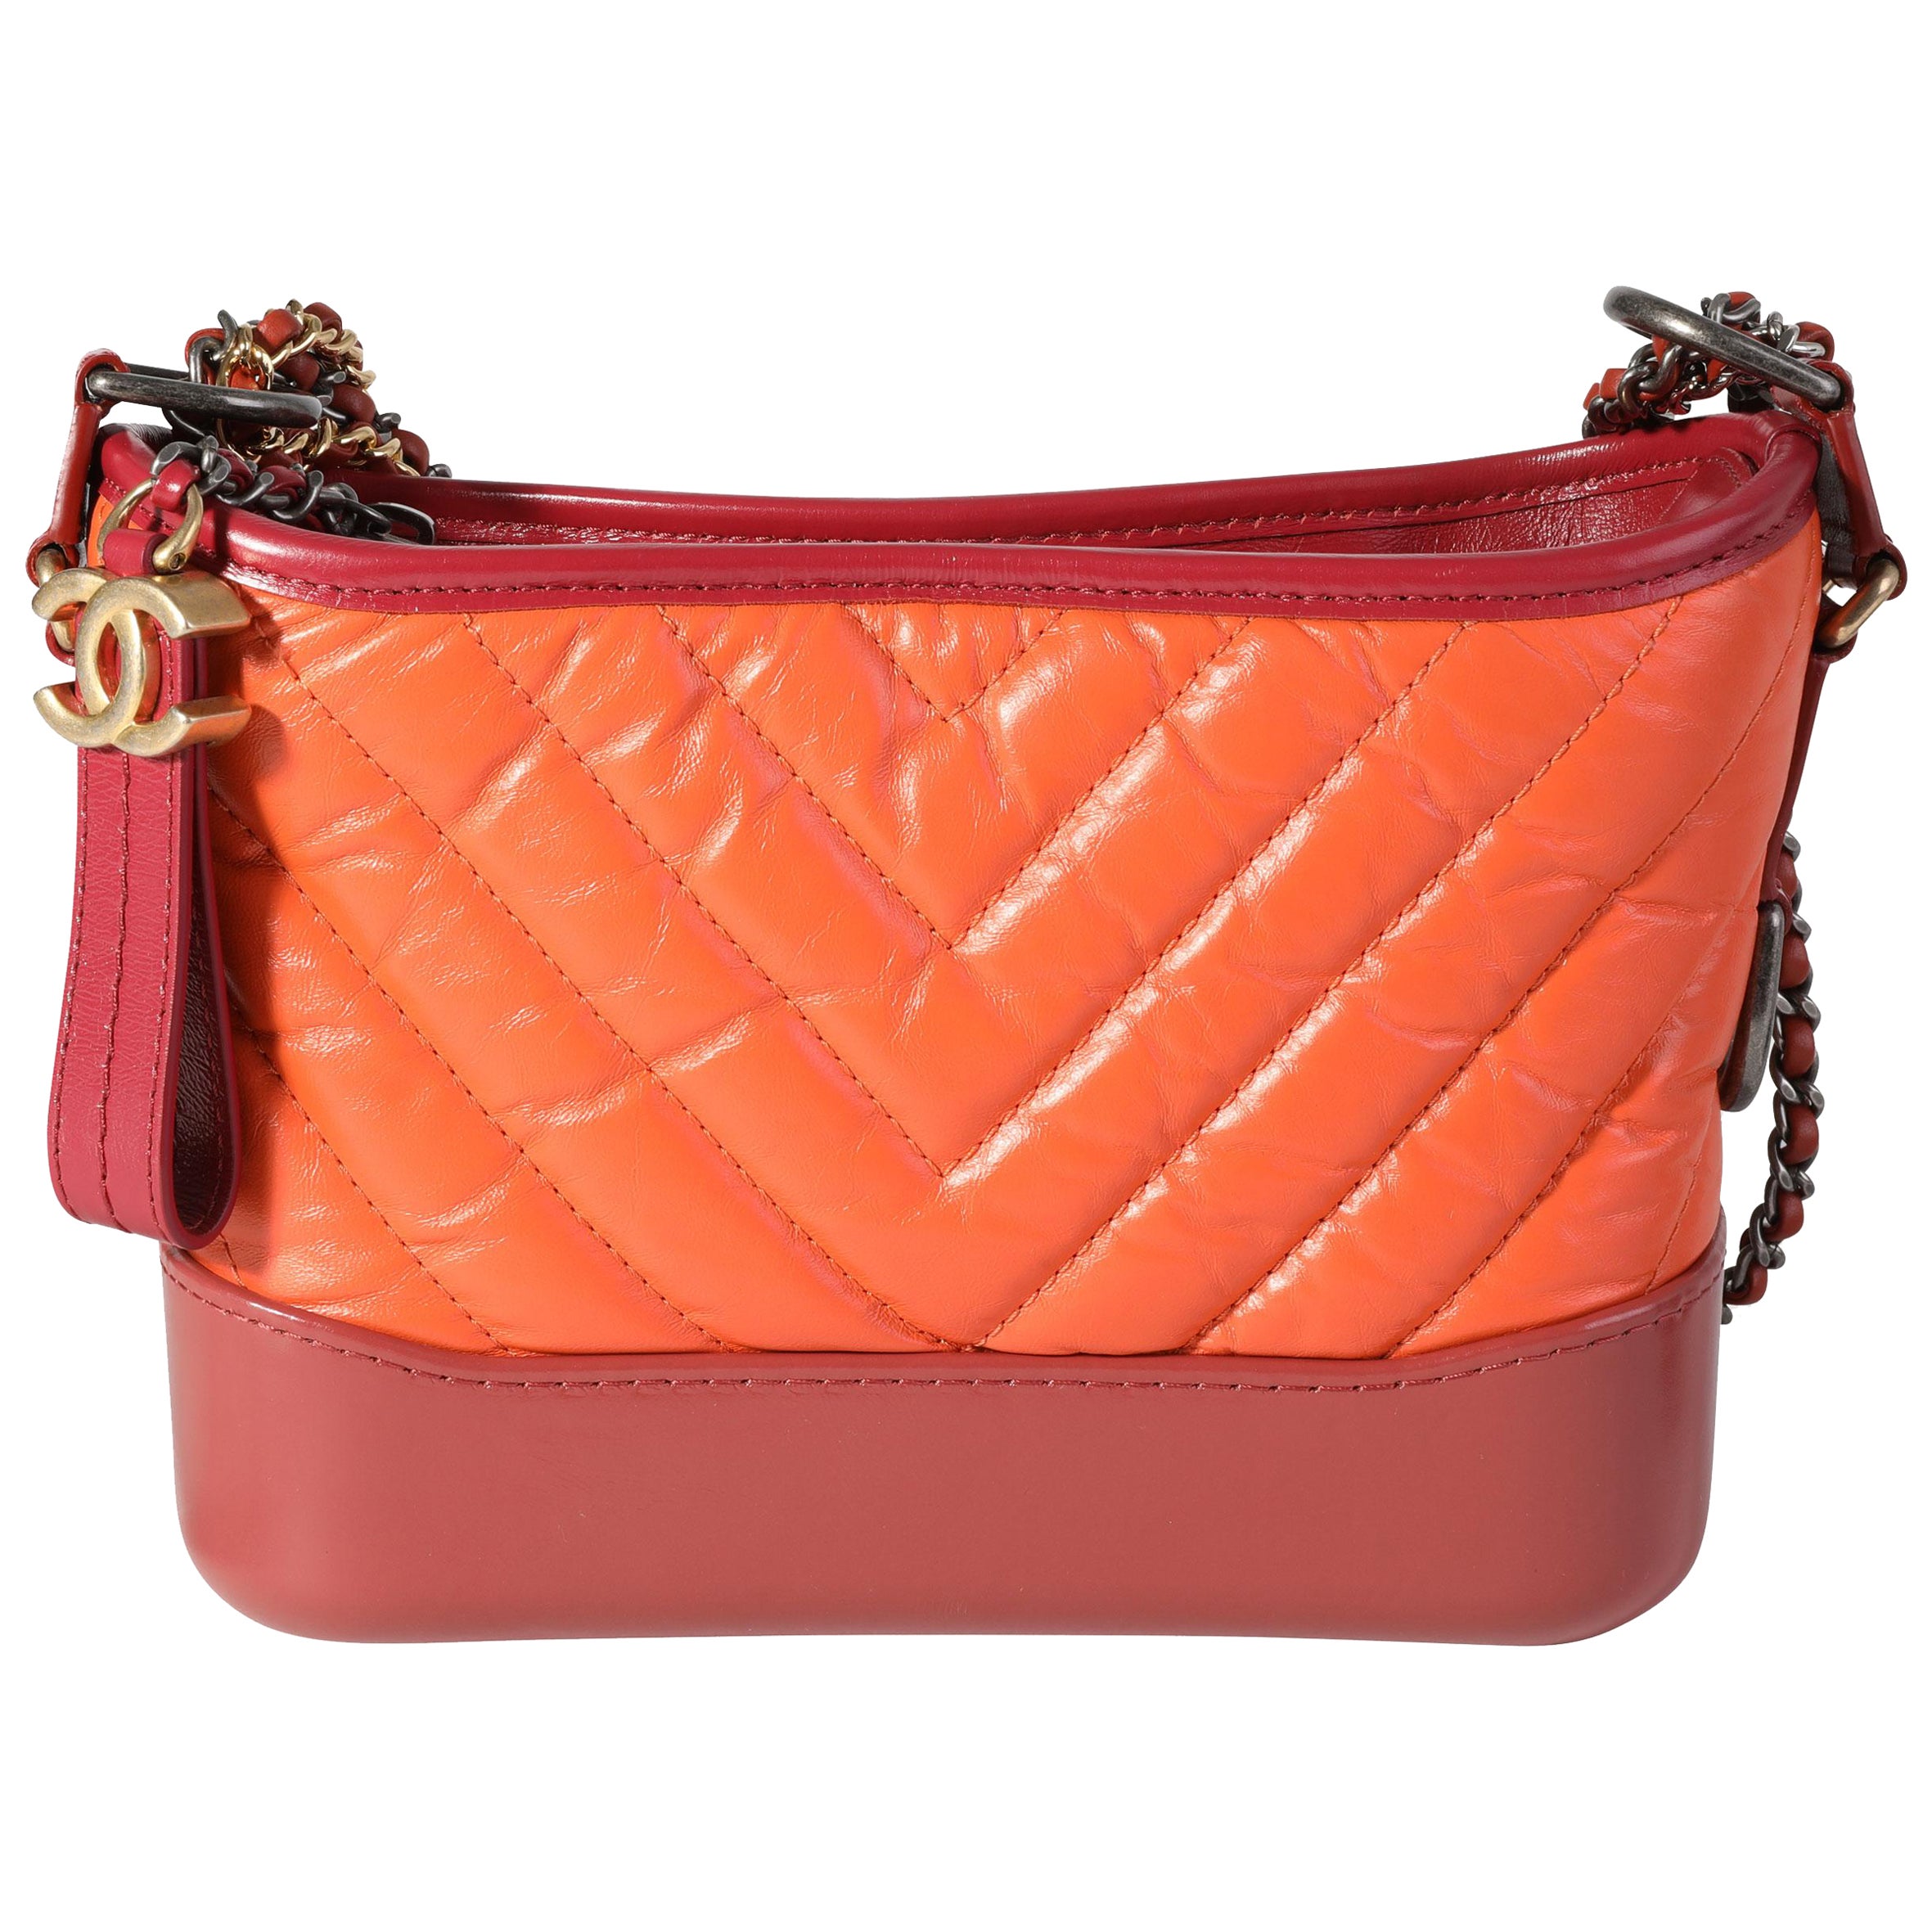 Chanel Orange & Red Aged Calfskin Chevron Quilted Small Gabrielle Hobo